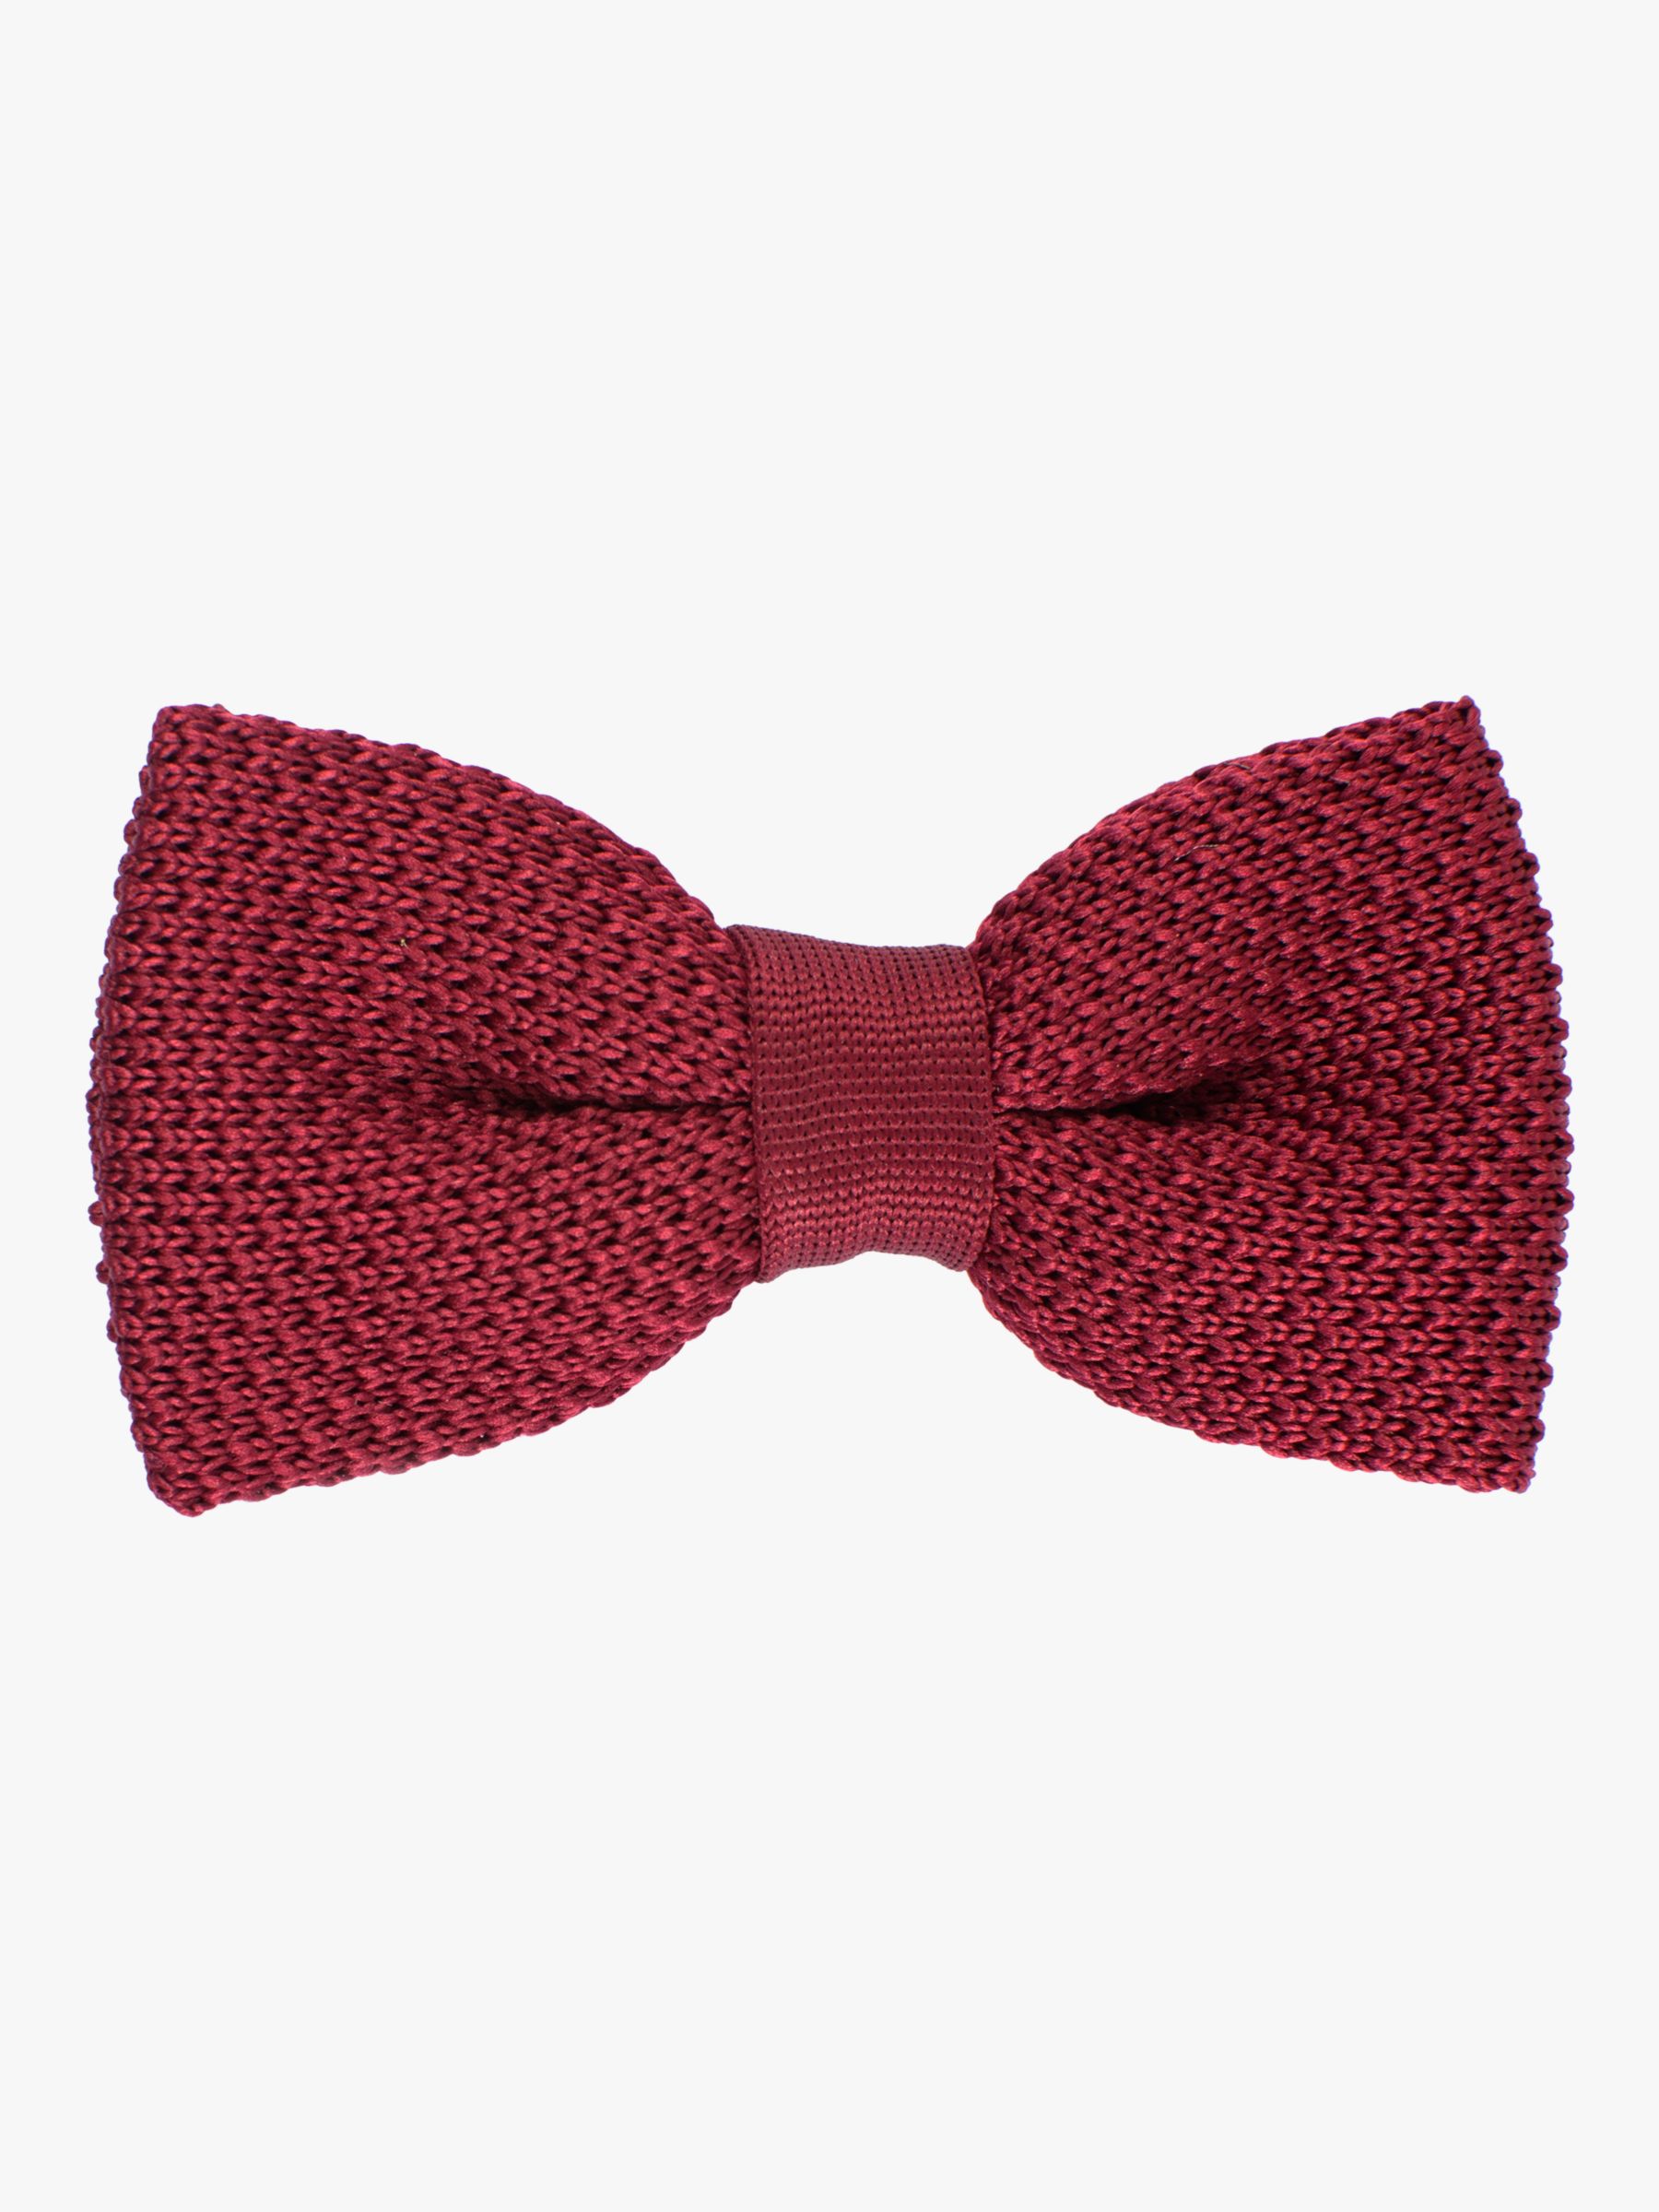 John Lewis & Partners Heirloom Collection Children's Knitted Bow Tie, Burgundy